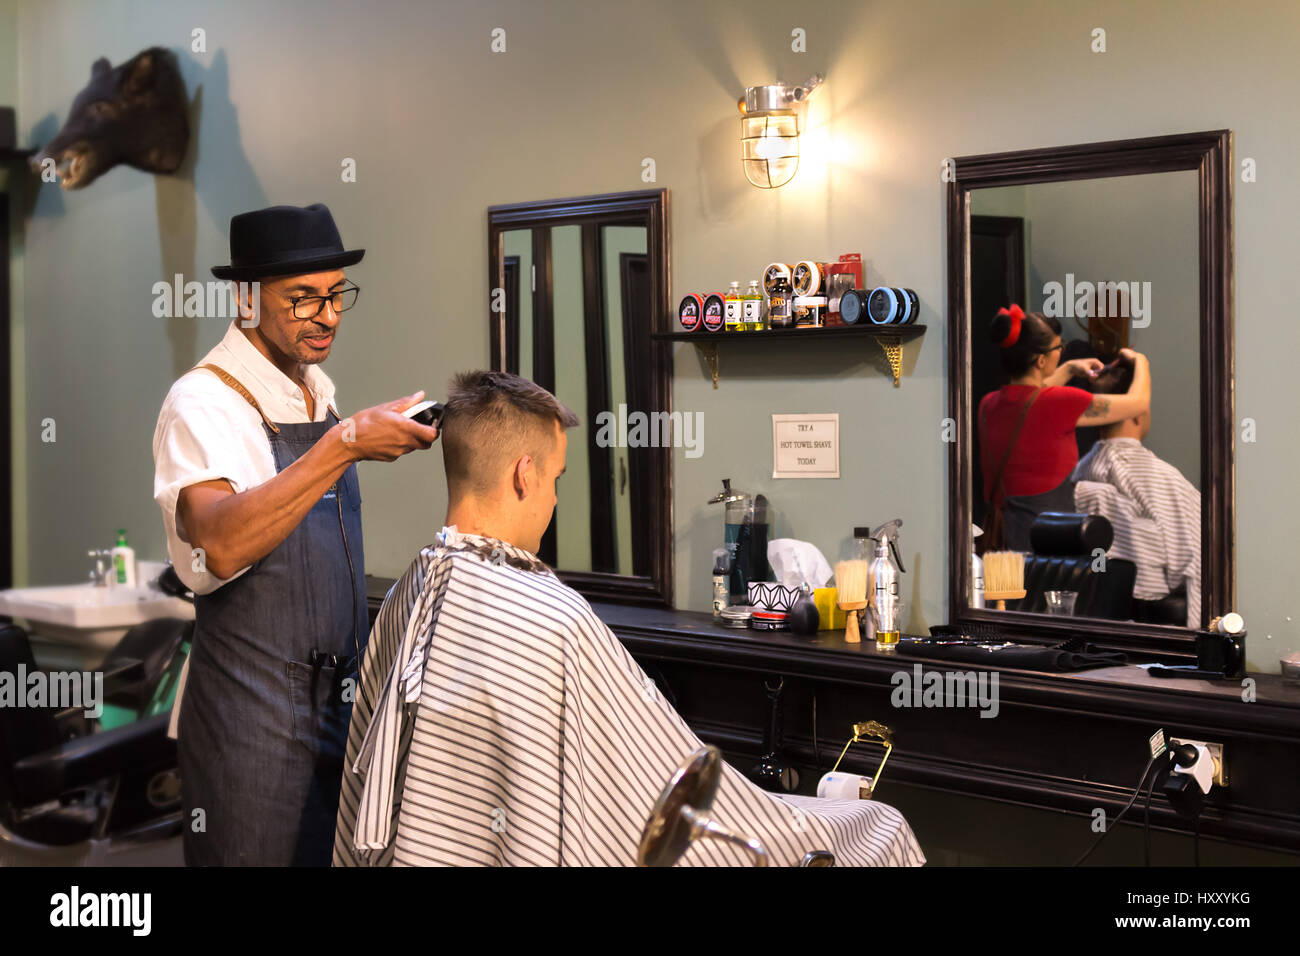 Auckland - February 17, 2017: A barber is making a haircut with a clipper for a customer, inside a retro style barbershop. Stock Photo